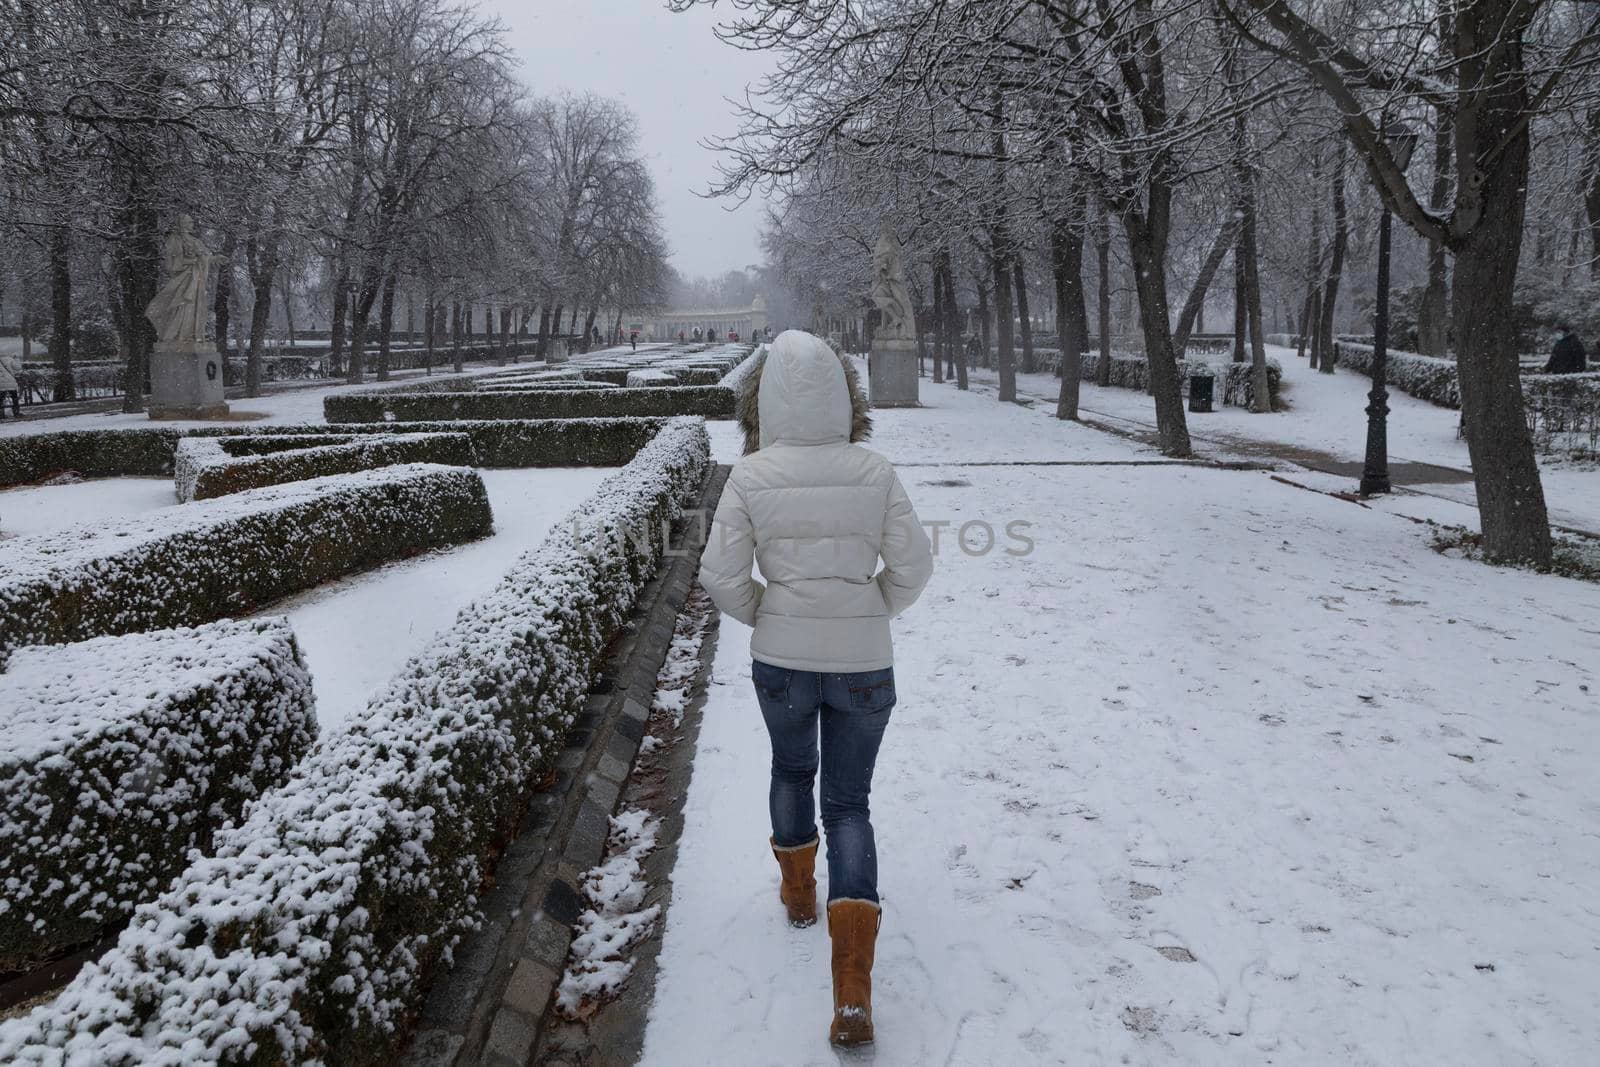 Young girl enjoys a snowy day in the Retiro park, Madrid. by alvarobueno